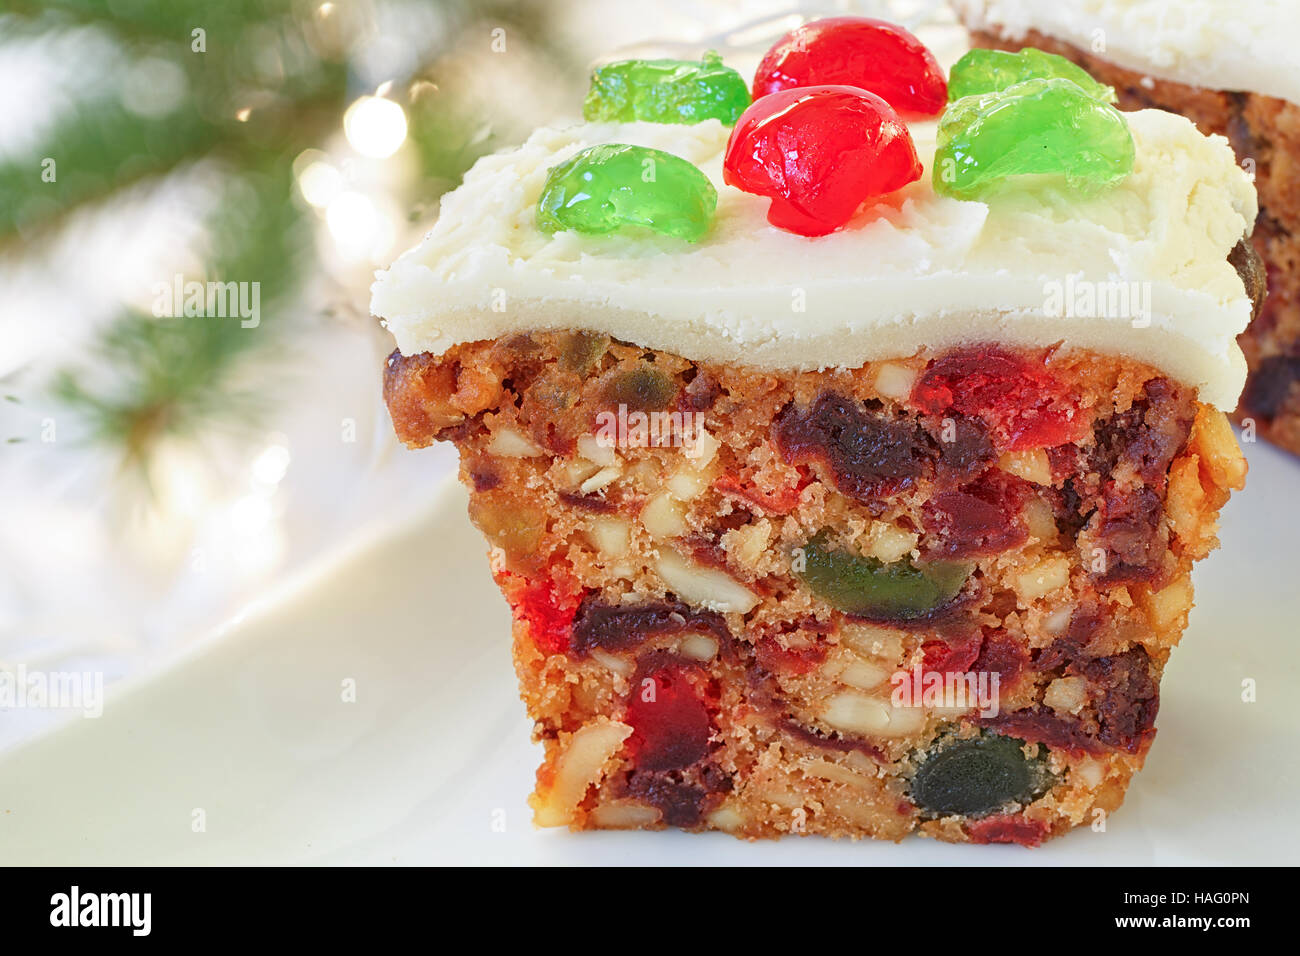 Homemade Christmas fruitcake with candied cherry decorations. Stock Photo